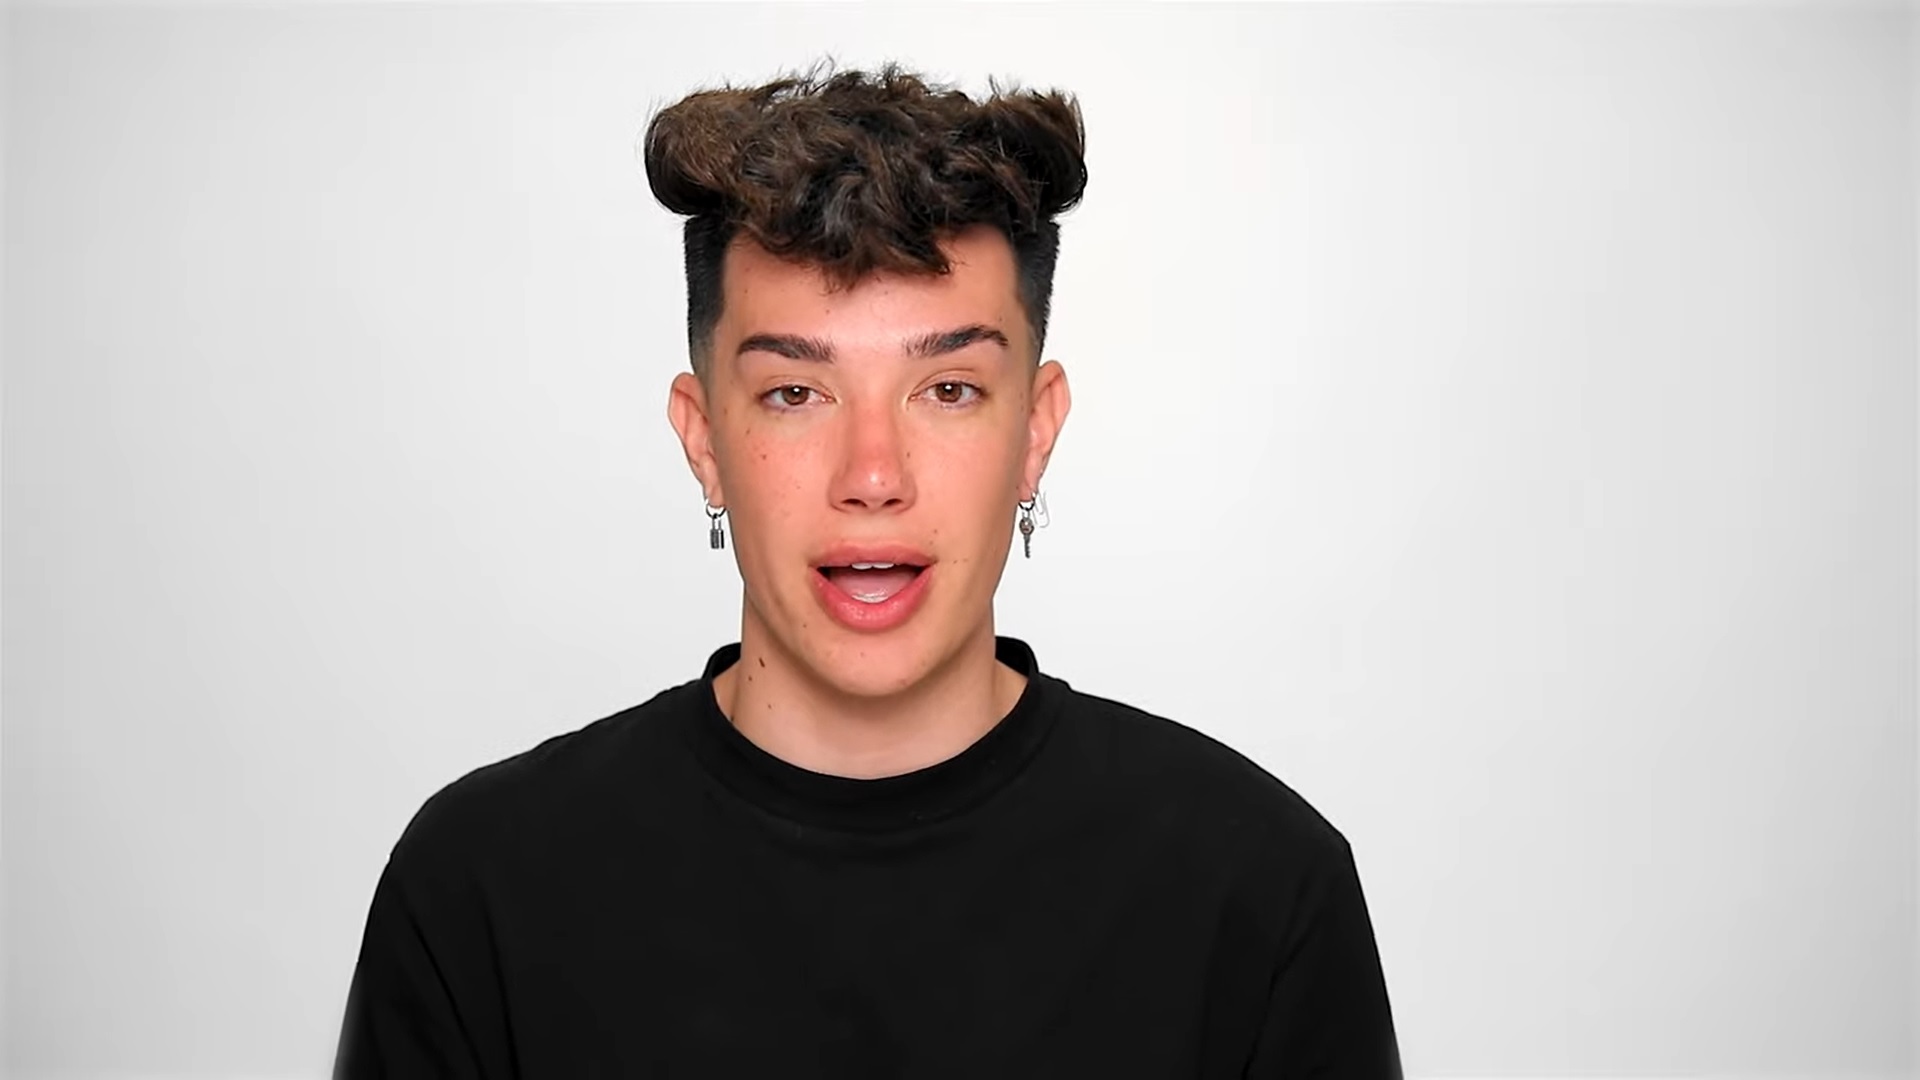 English X Video14 - James Charles' Confession to Grooming Underage Boys | EarlyGame